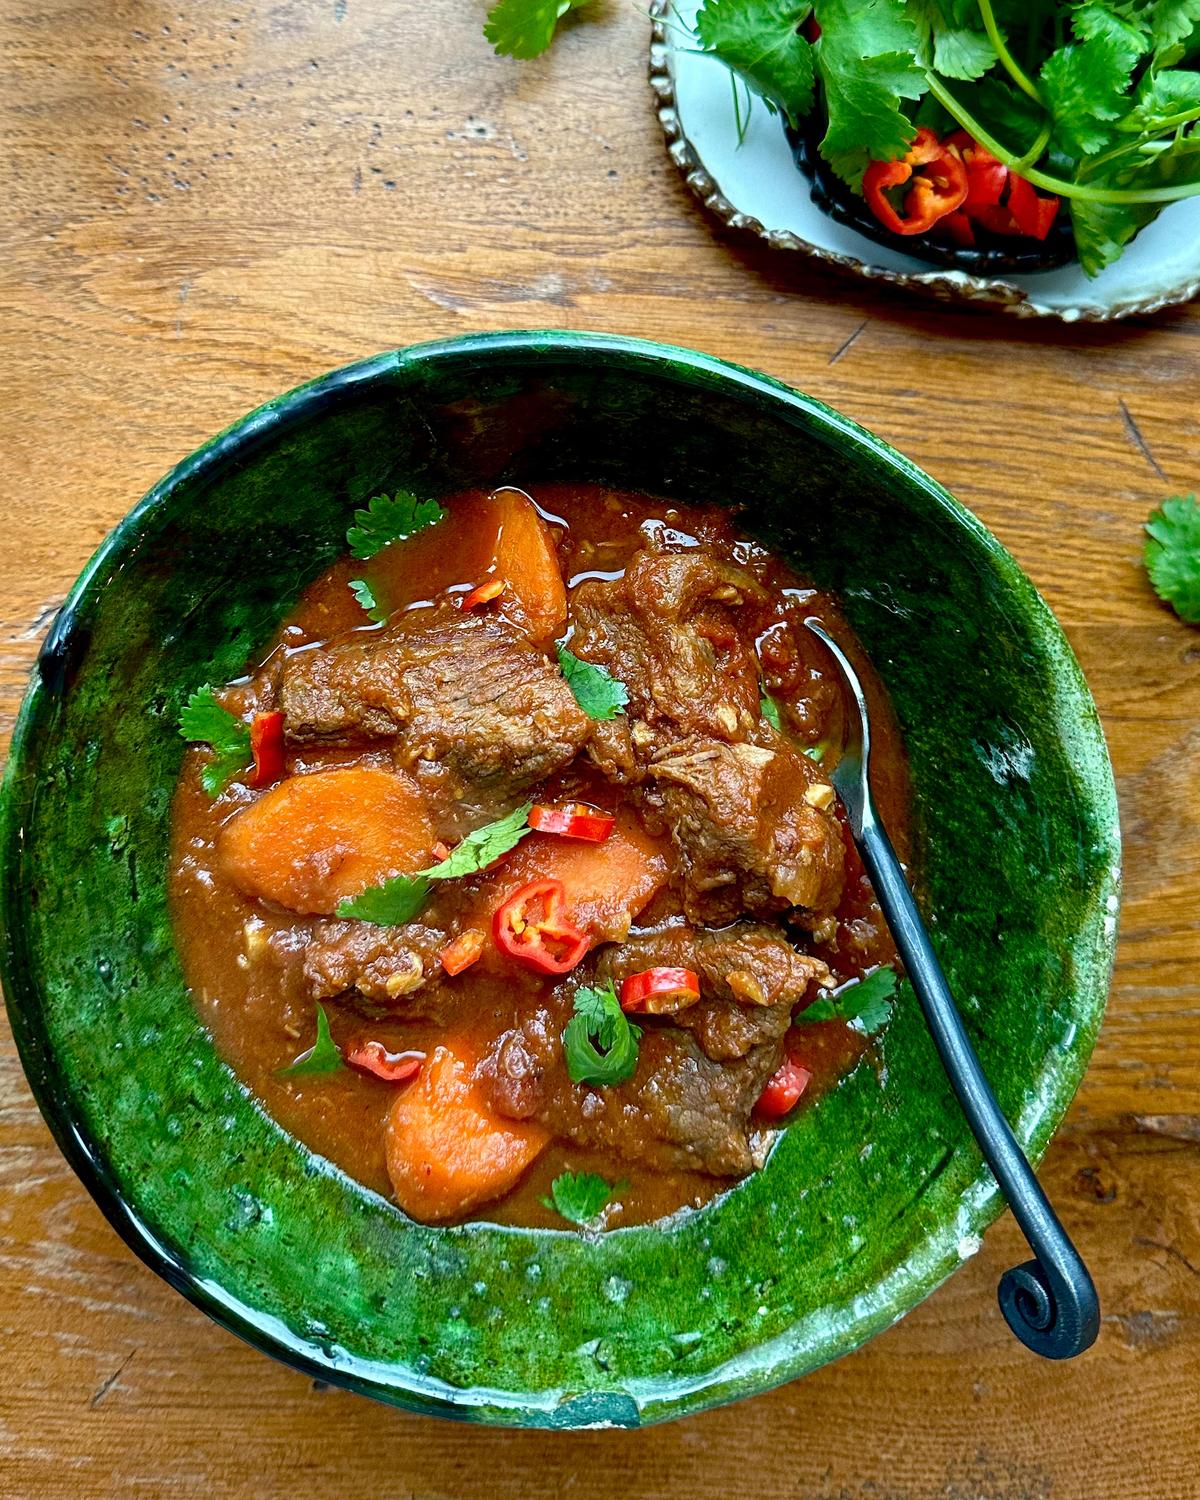 This aromatic lamb stew is inspired by mrouzia, a traditional Moroccan meat-and-vegetable tagine. (Lynda Balslev for Tastefood)